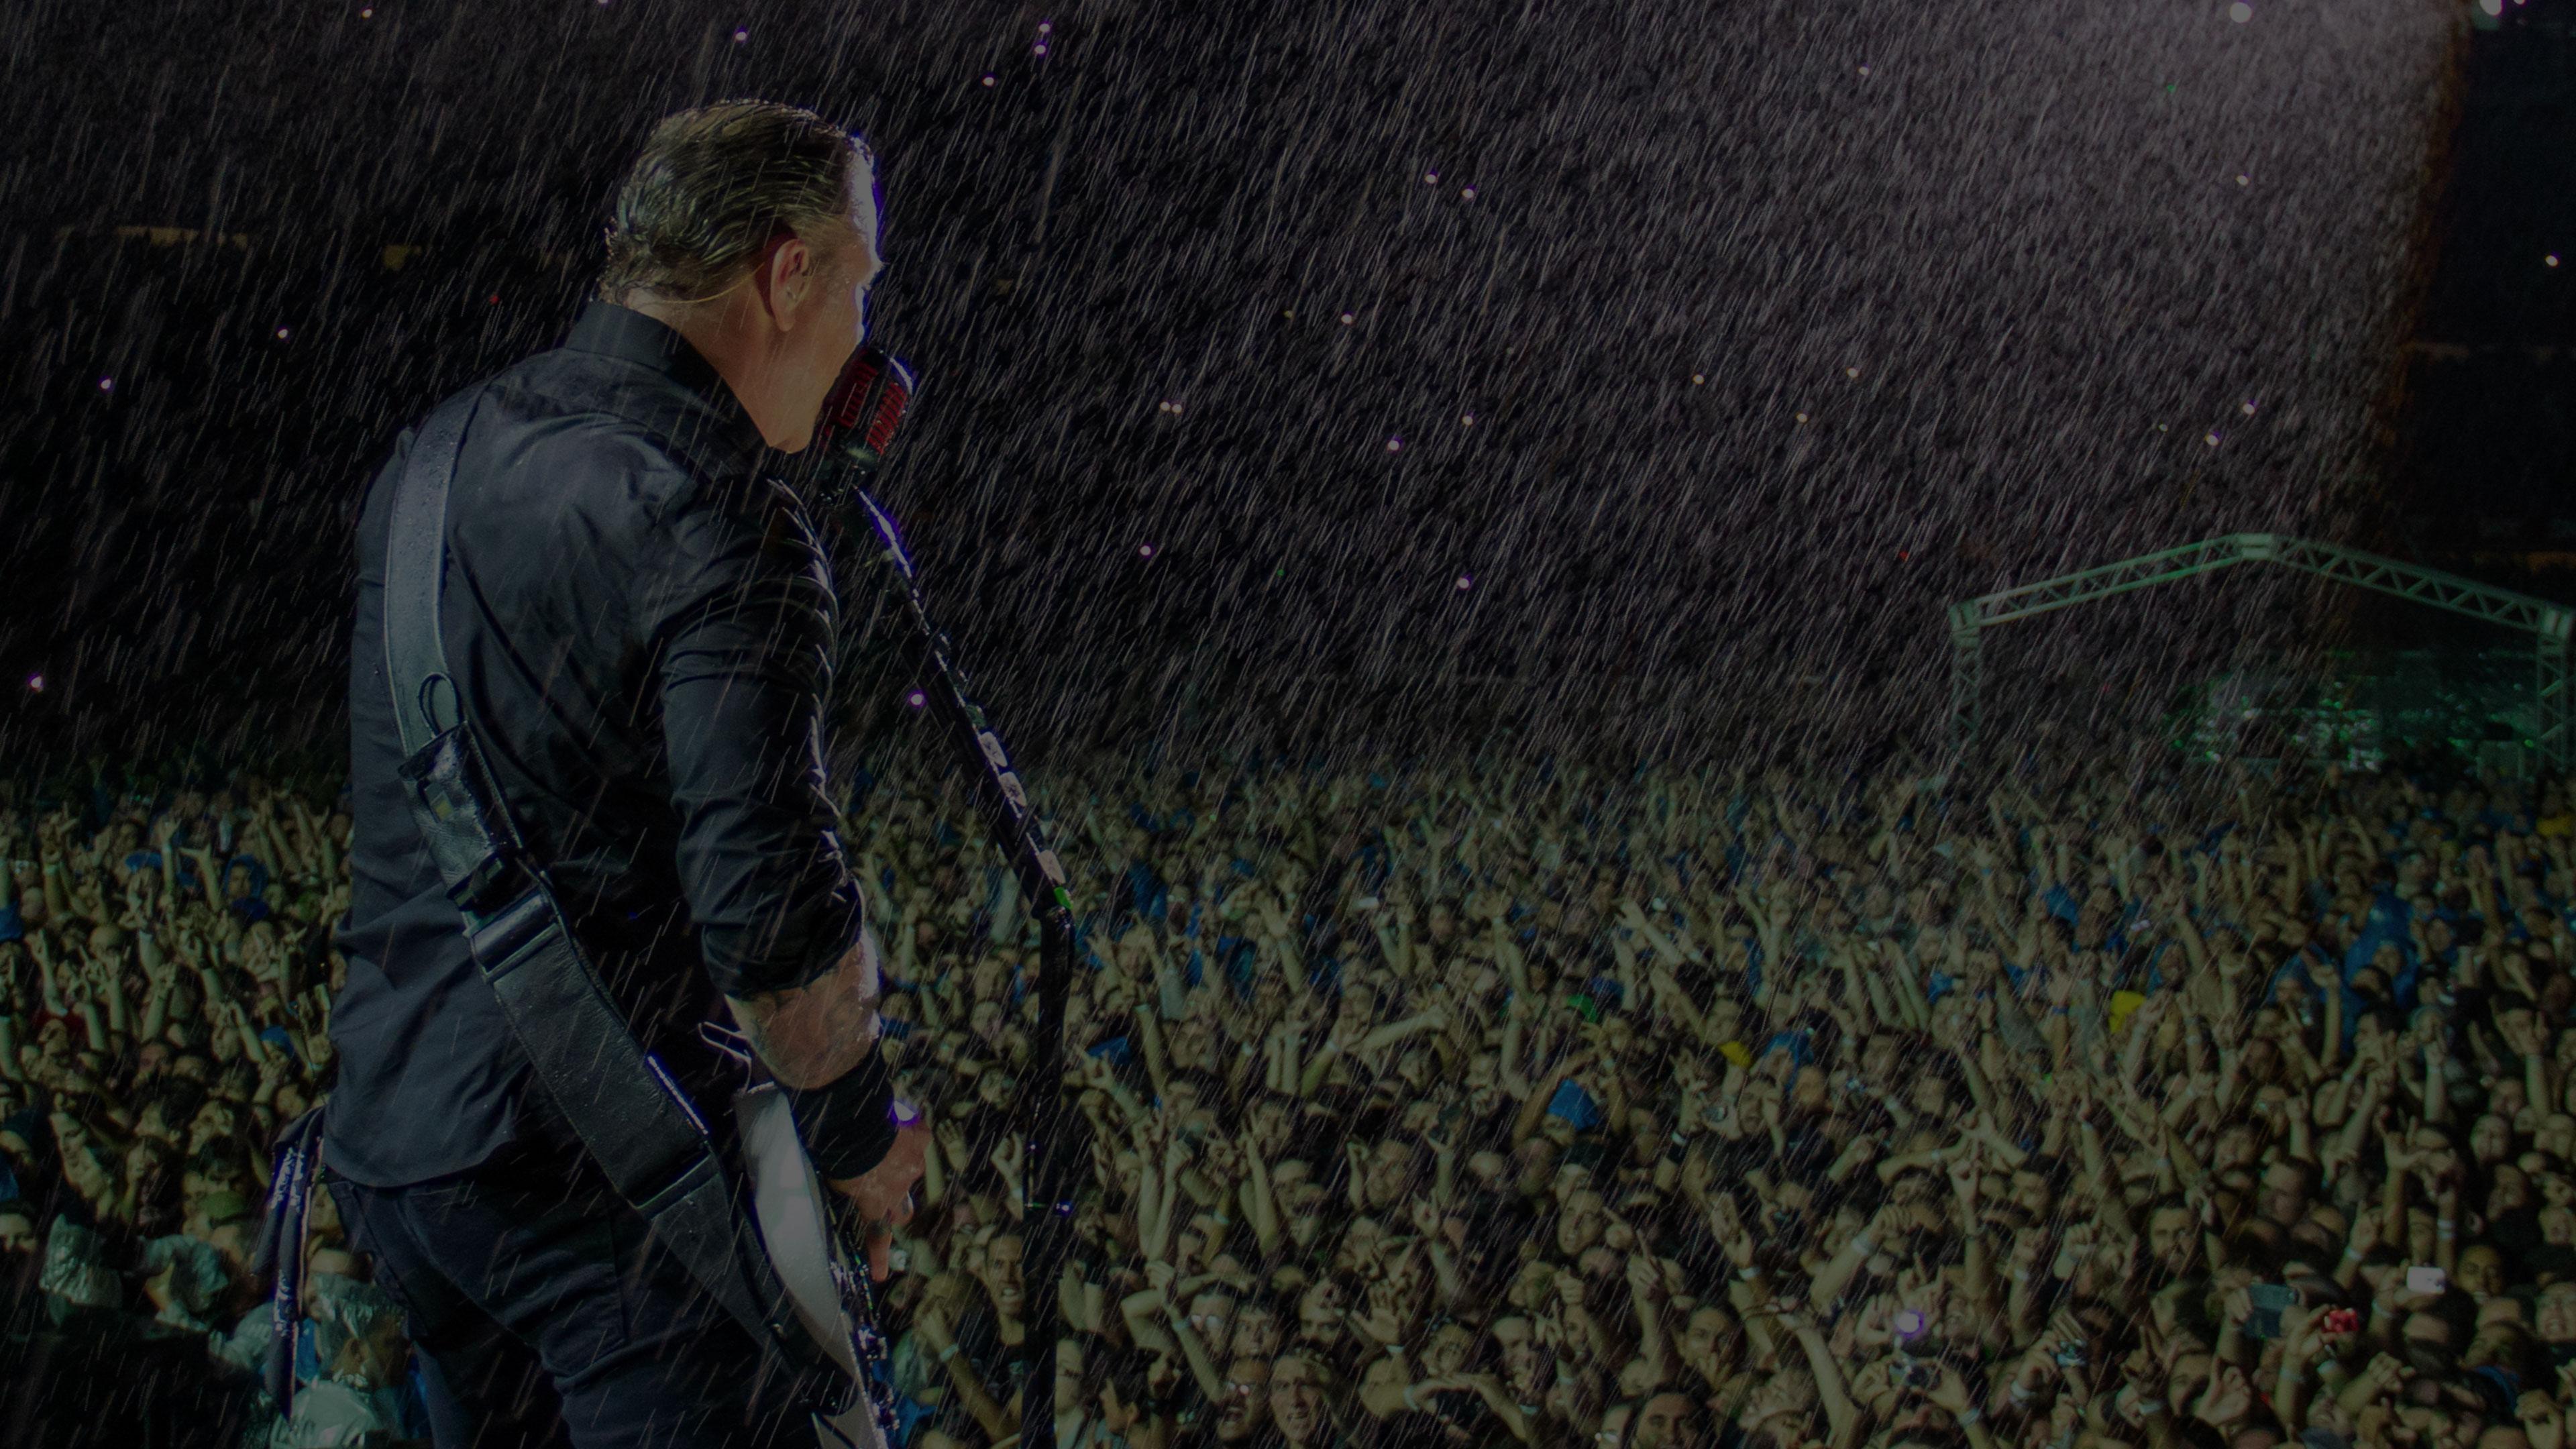 Banner Image for the photo gallery from the gig in São Paulo, Brazil shot on March 22, 2014